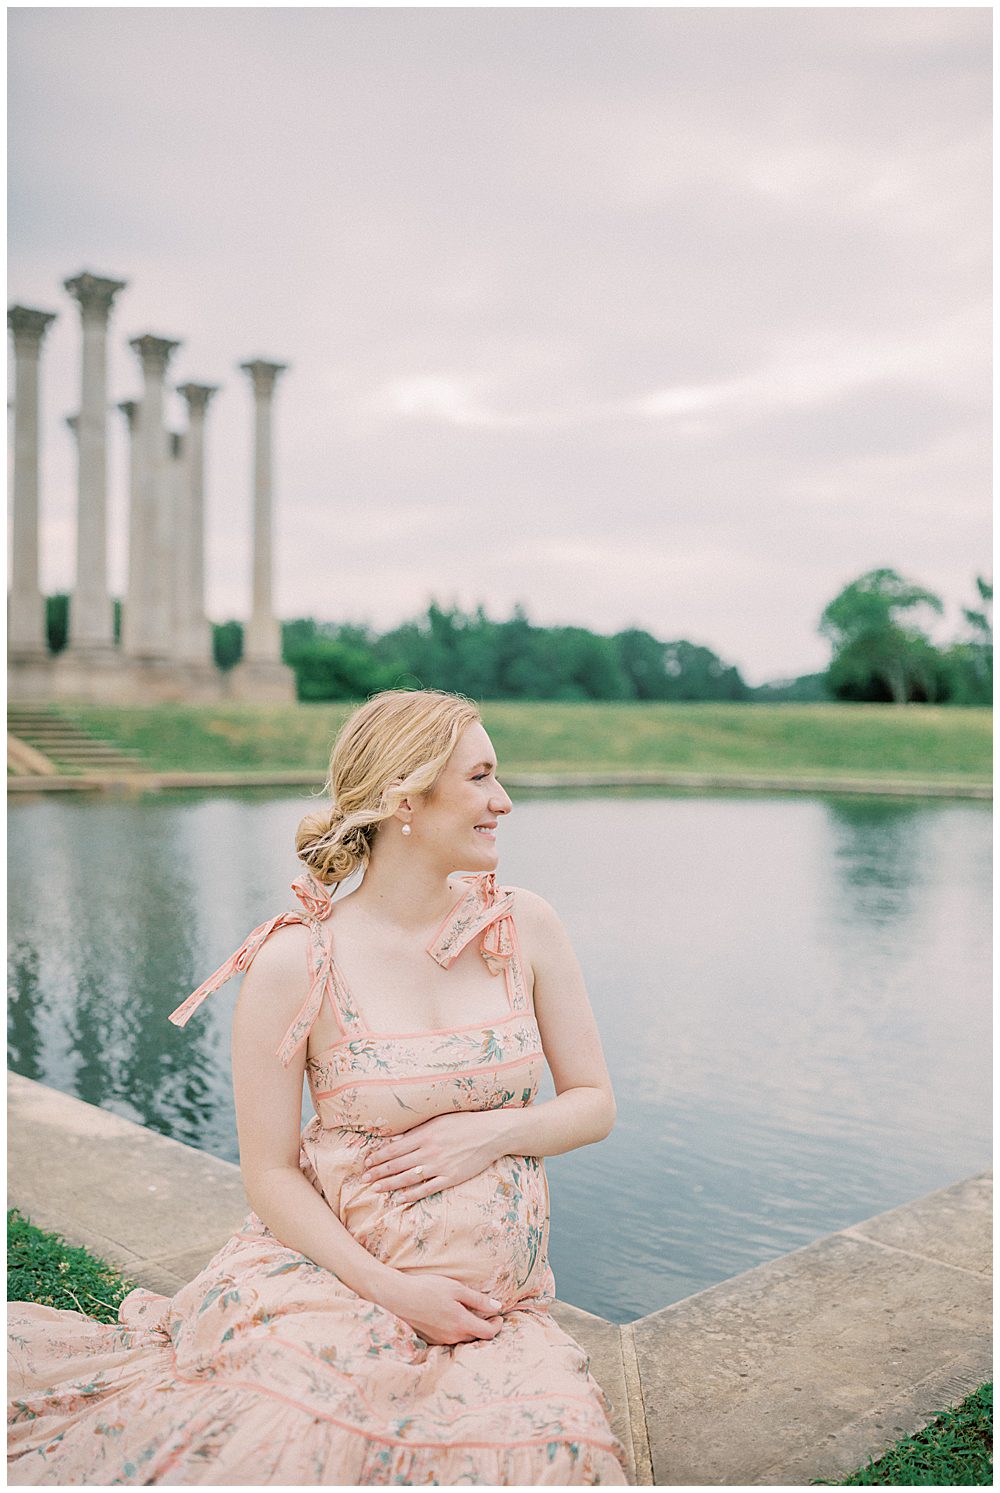 Blonde mother in Zimmerman pink dress sits in front of pond with hands on her belly during her maternity session.